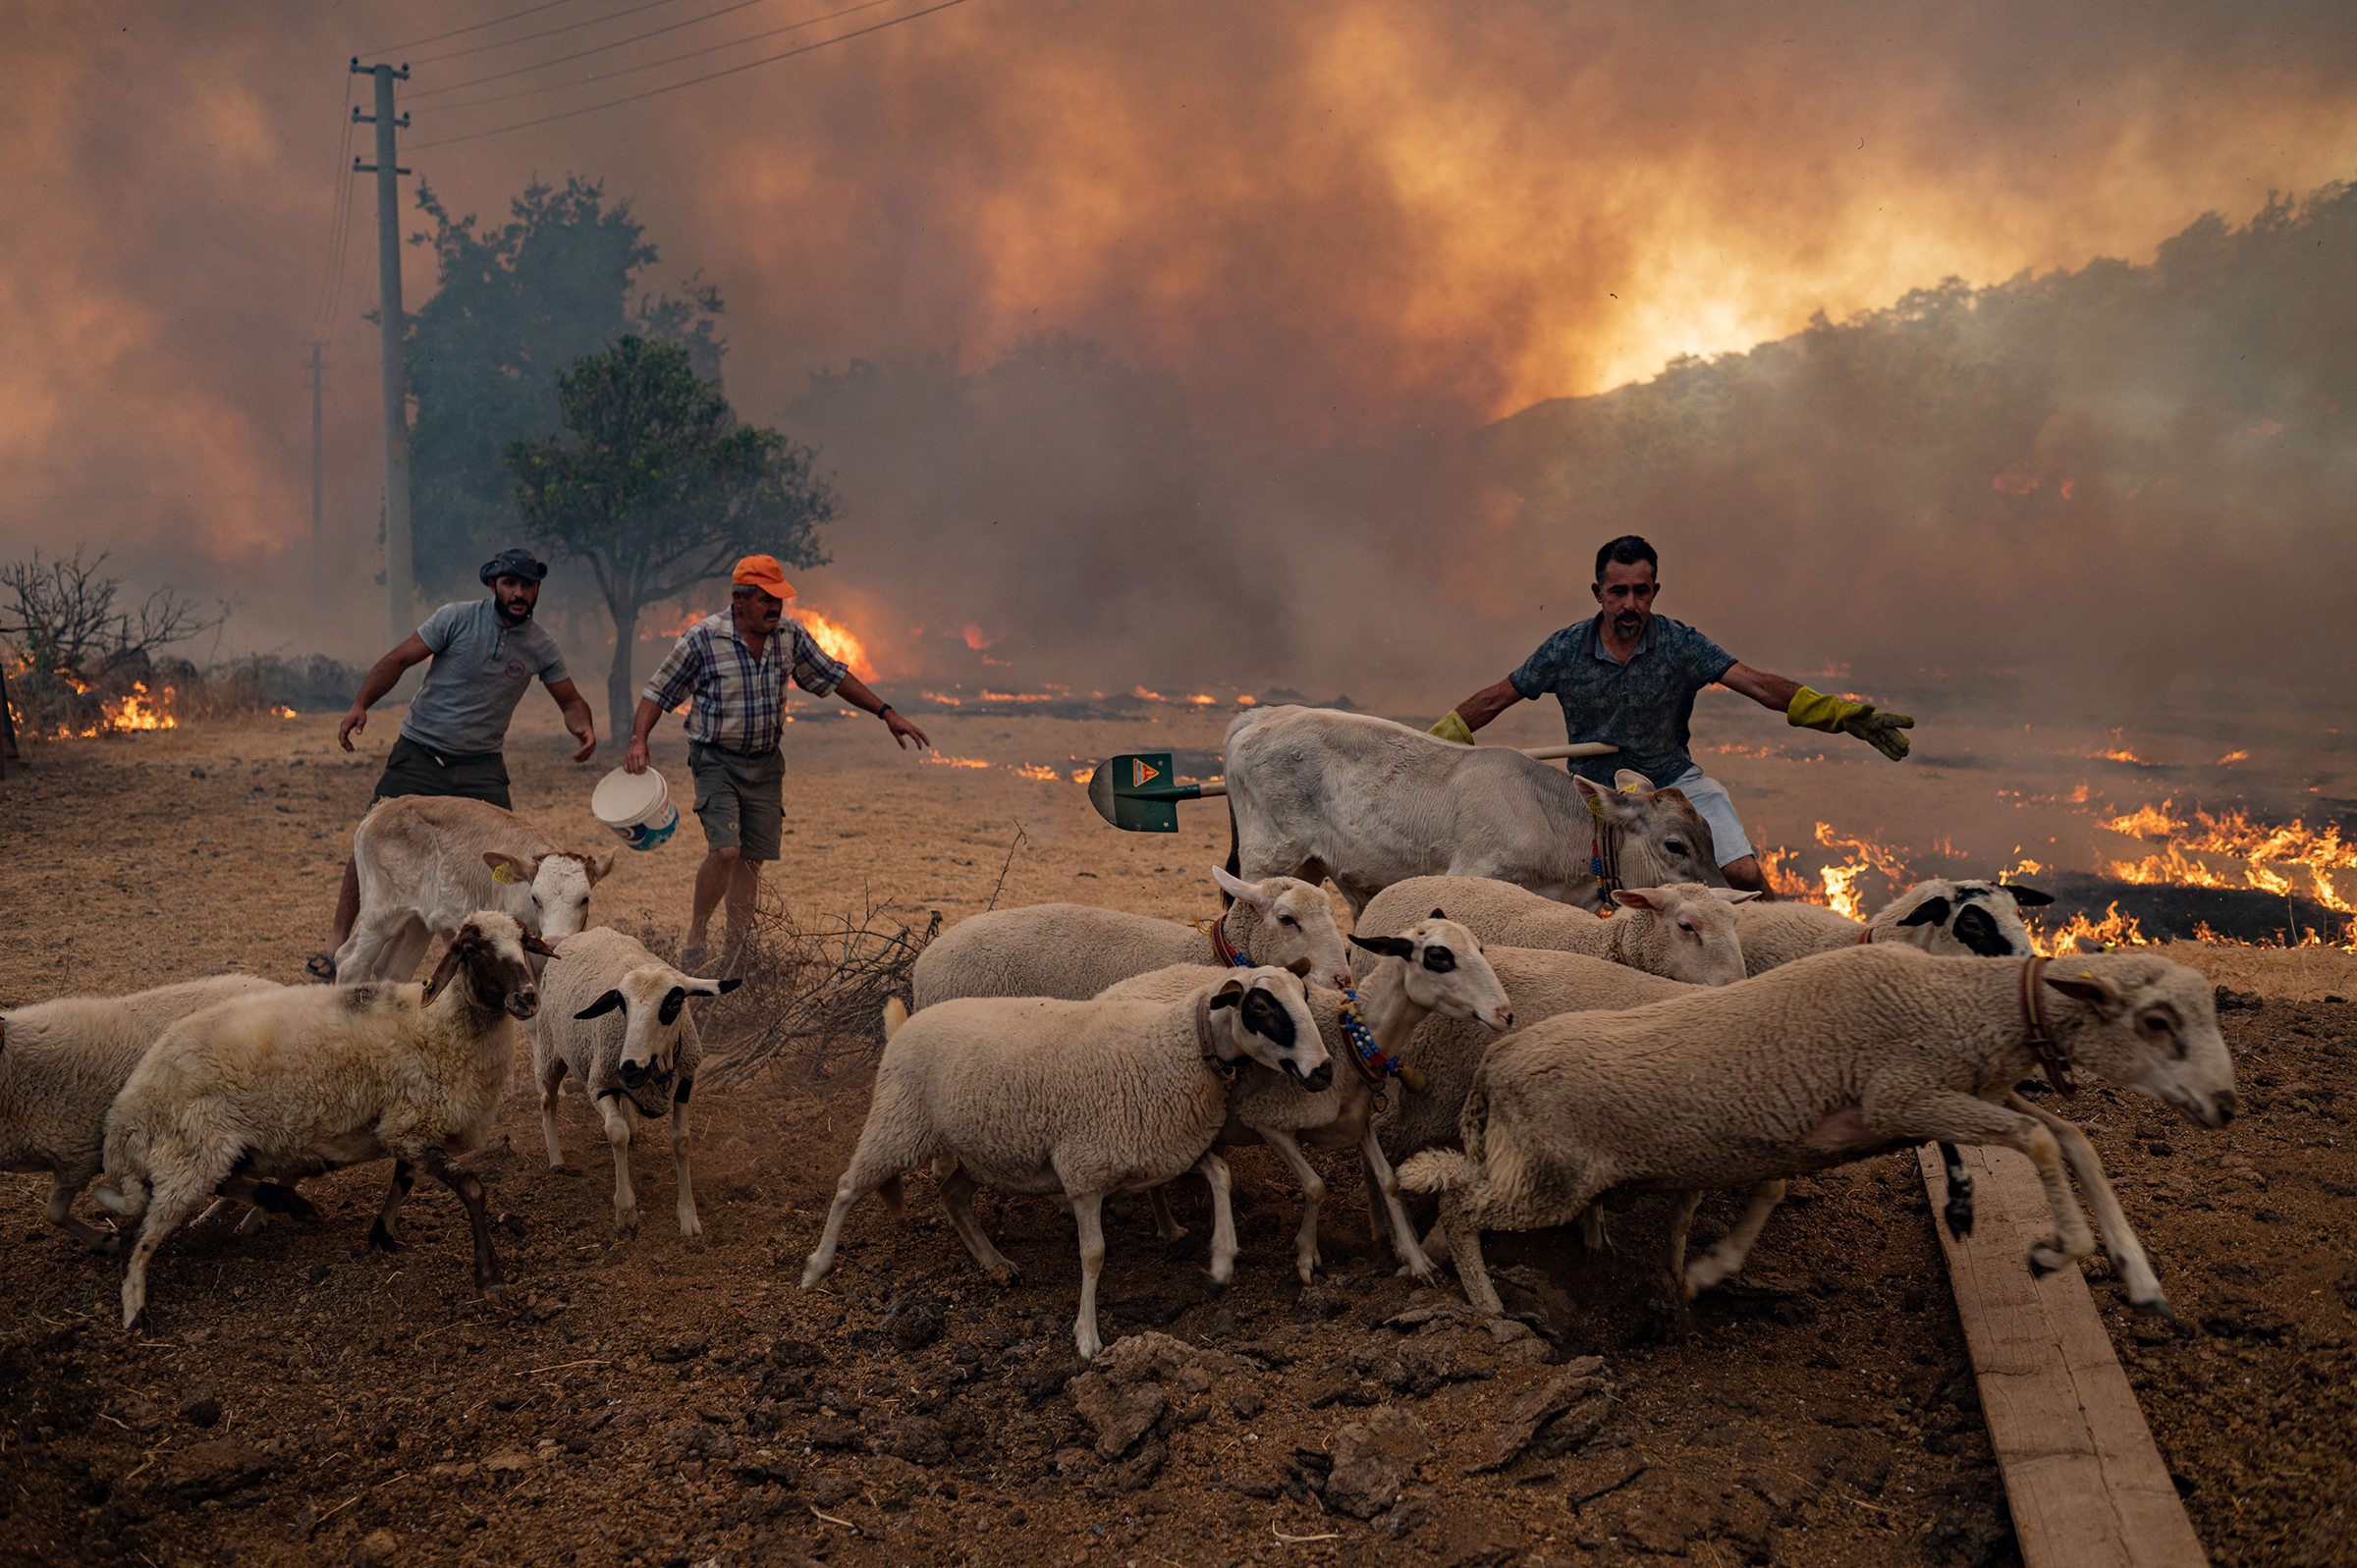 Men gather sheeps to take them away from an advancing fire in Mugla, Marmaris district, Turkey on Aug. 2.